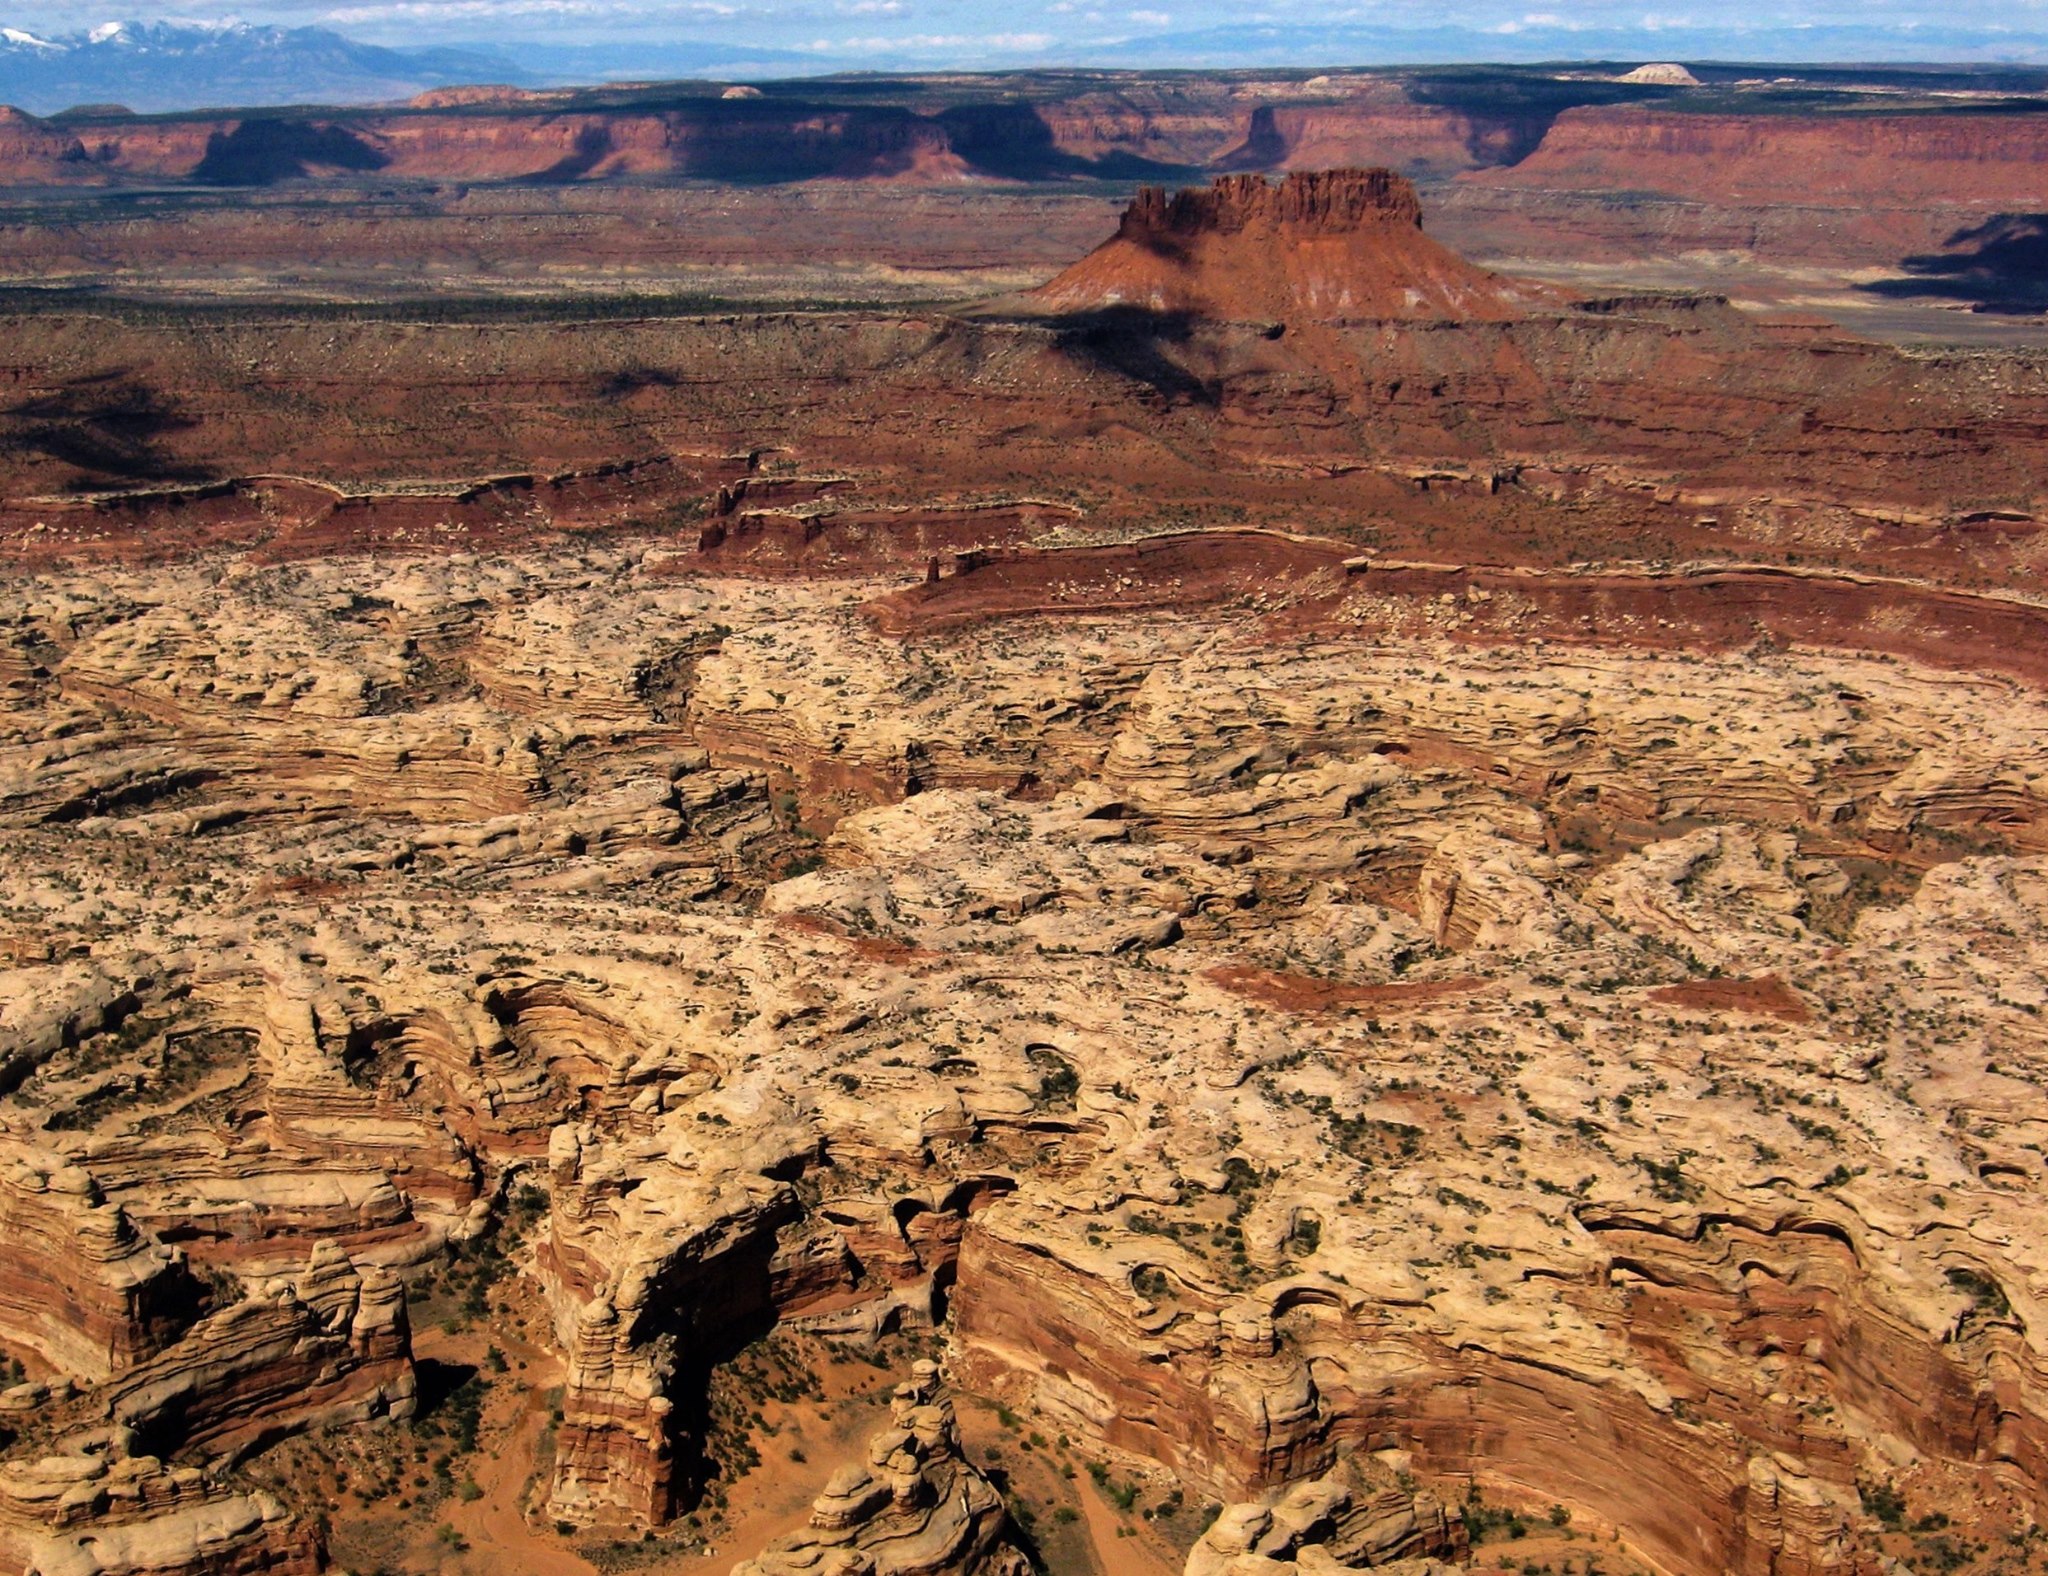 An aerial photo shows stripes and swirls of red and tan sandstone overlapping in a convoluted canyon. A large red butte stands tall in the background along the blue horizon.